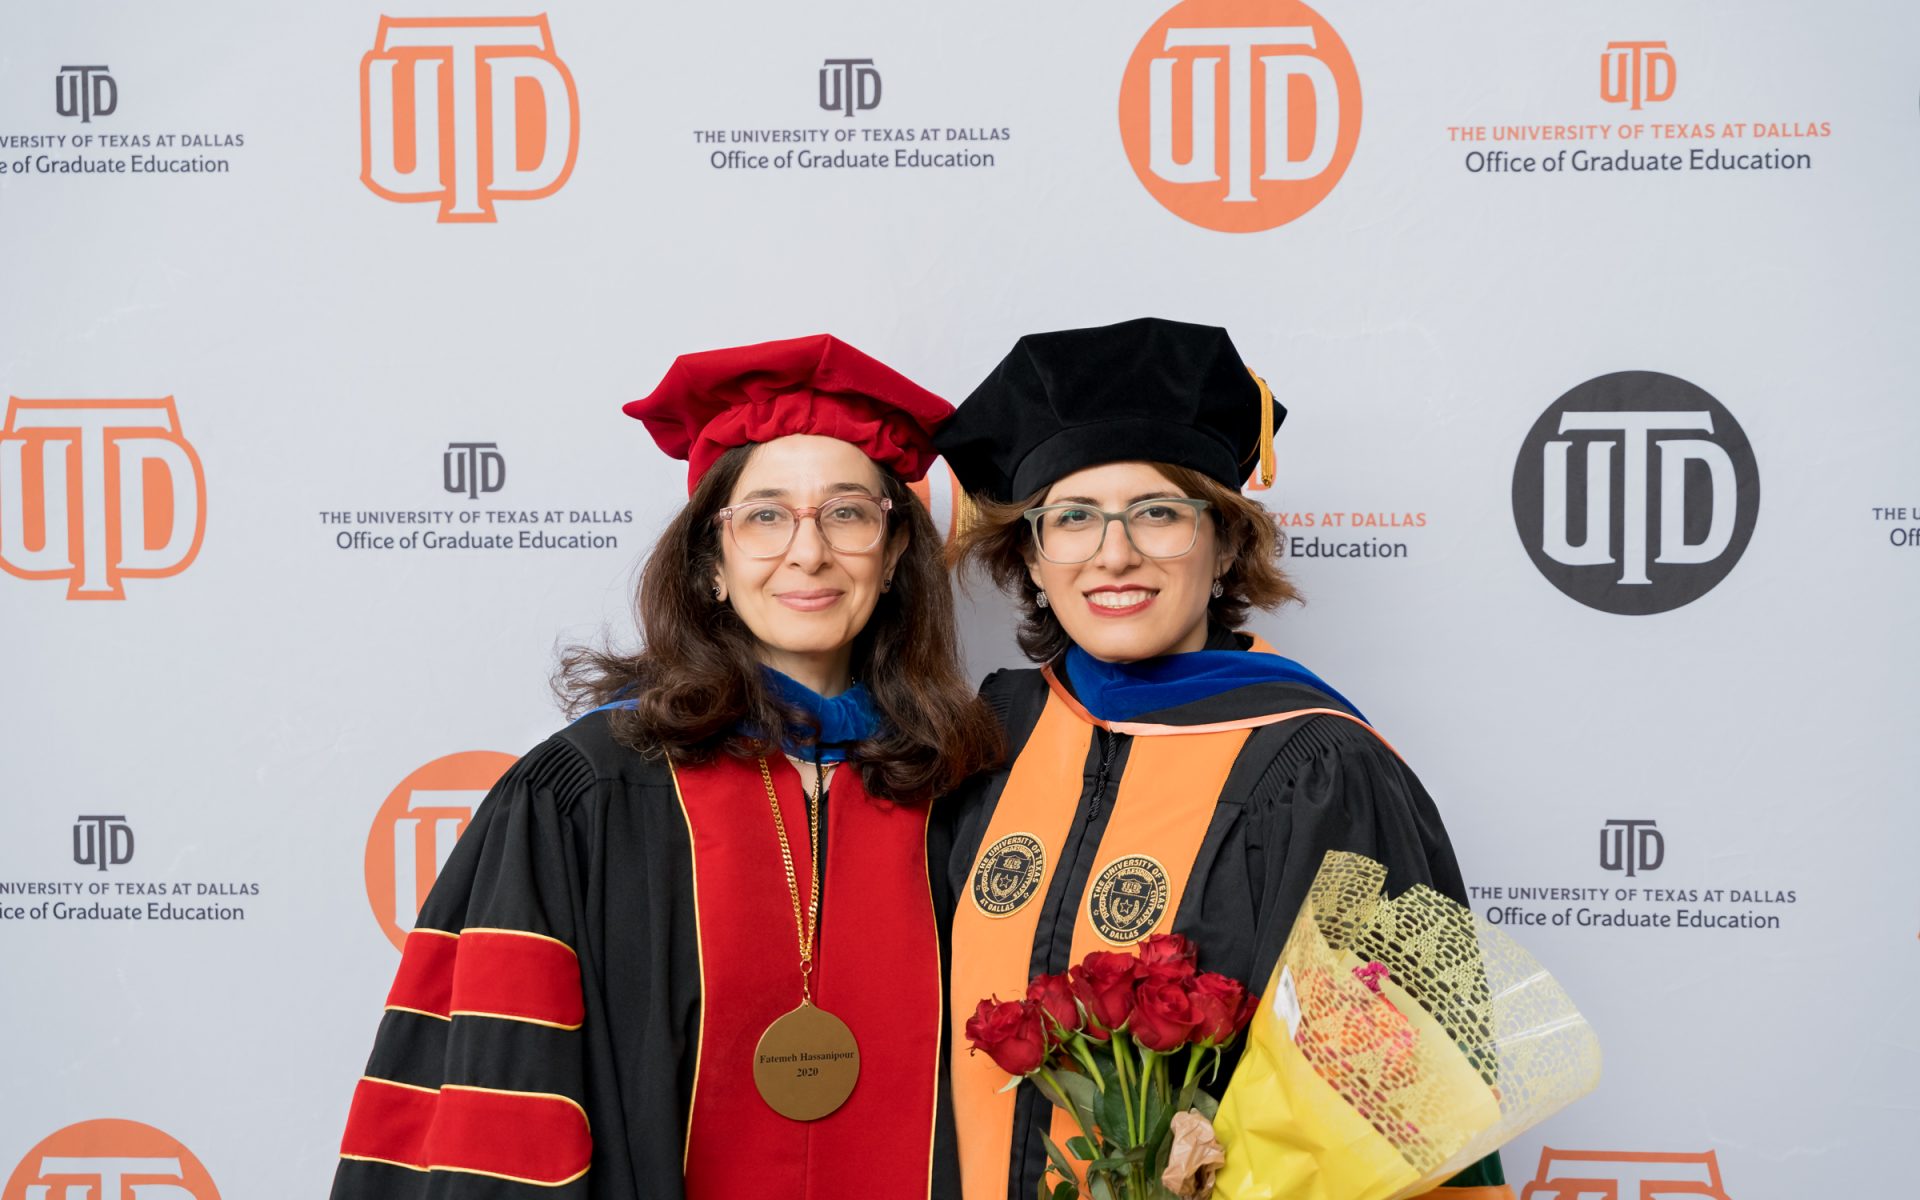 Shadi Zaheri PhD’22 has a bright future ahead of her with a position as a computational scientist at the Broad Institute of MIT and Harvard. Zaheri returned to Dallas for the hooding ceremony with her dissertation advisor, Dr. Fatemeh Hassanipour from the Department of Mechanical Engineering.